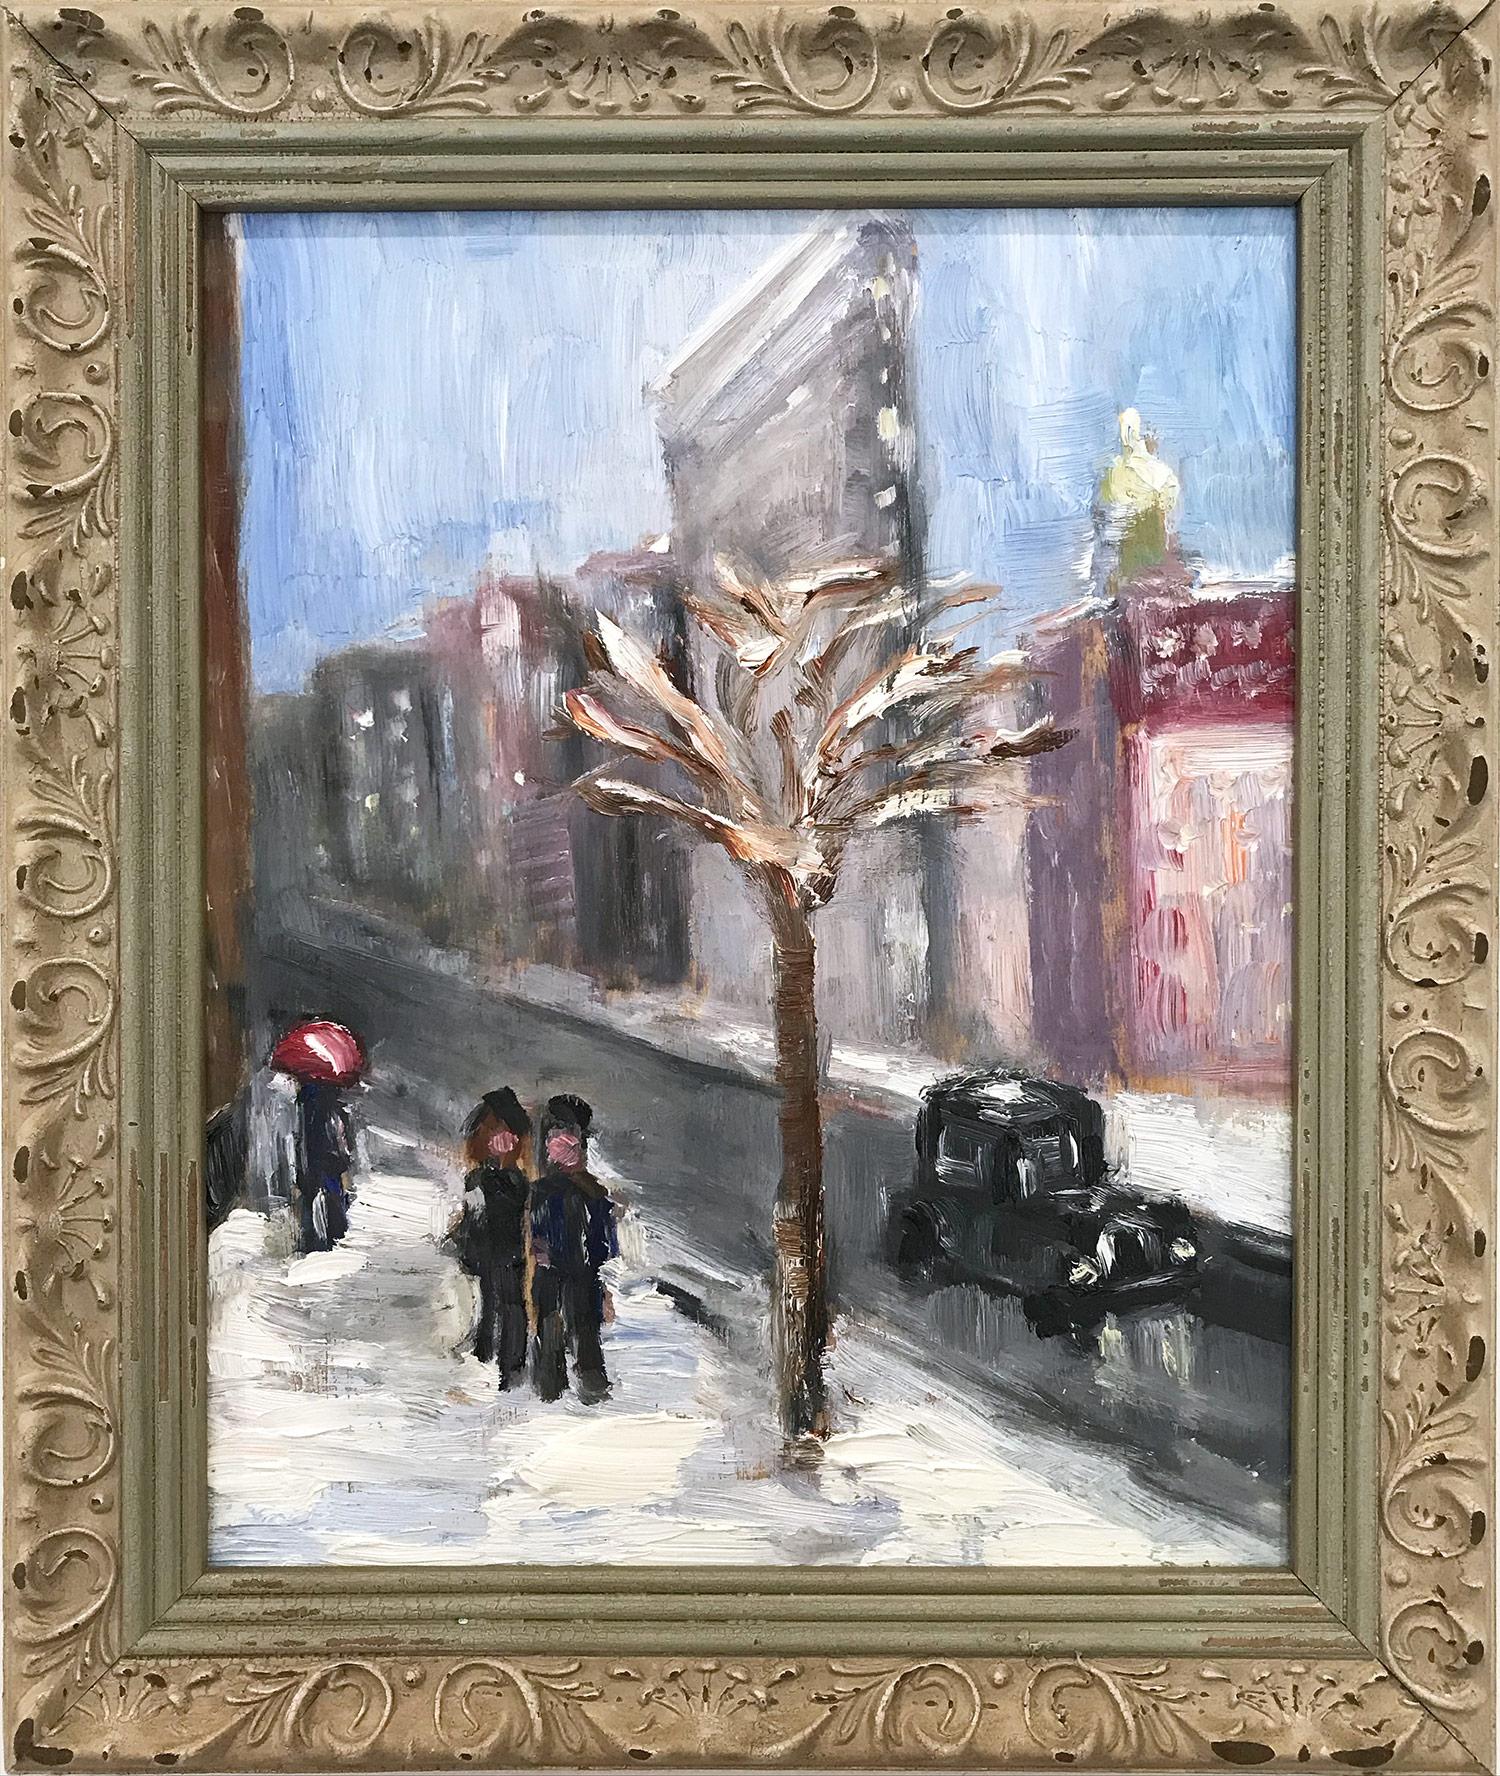 Cindy Shaoul Landscape Painting - "John and Yoko in NYC" Impressionistic Oil Painting City Landscape in Snow 